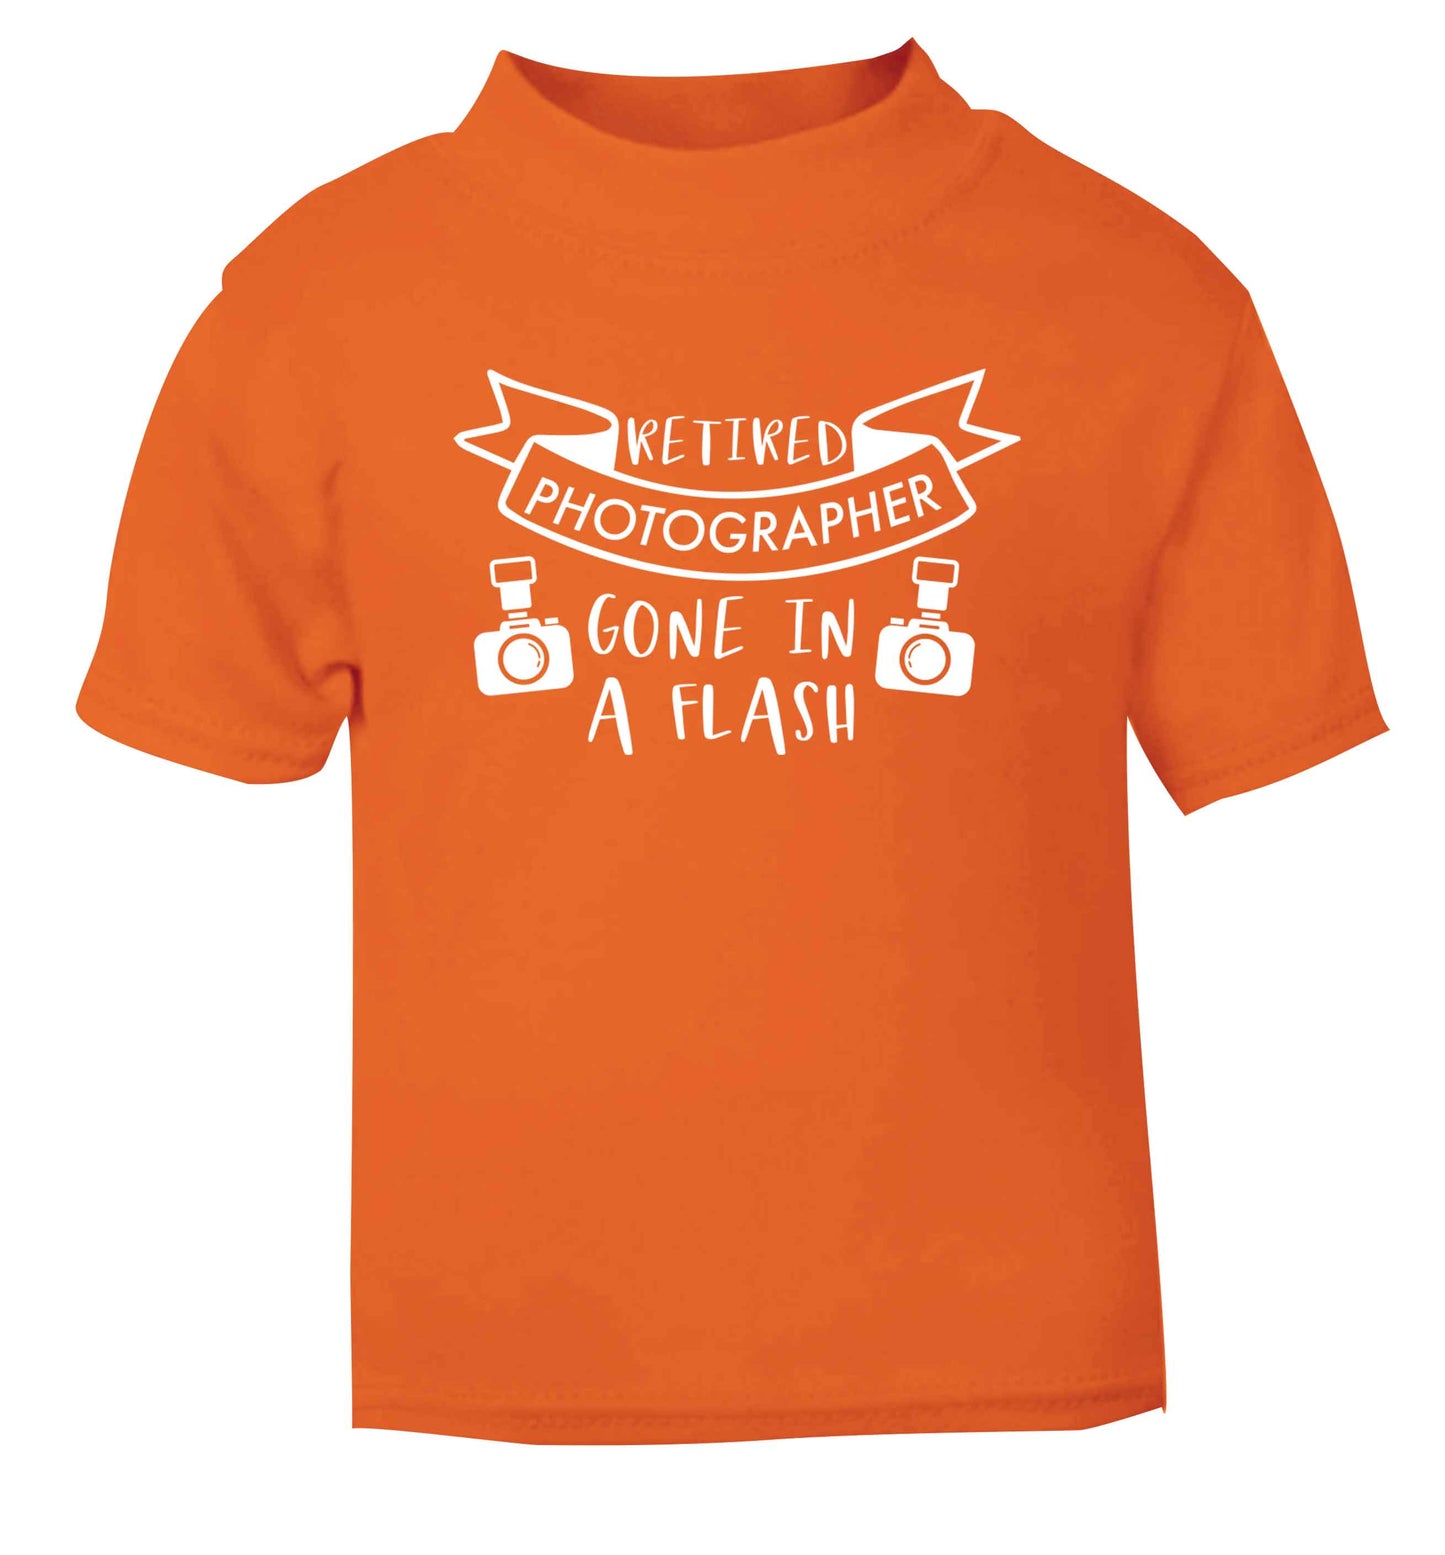 Retired photographer gone in a flash orange Baby Toddler Tshirt 2 Years